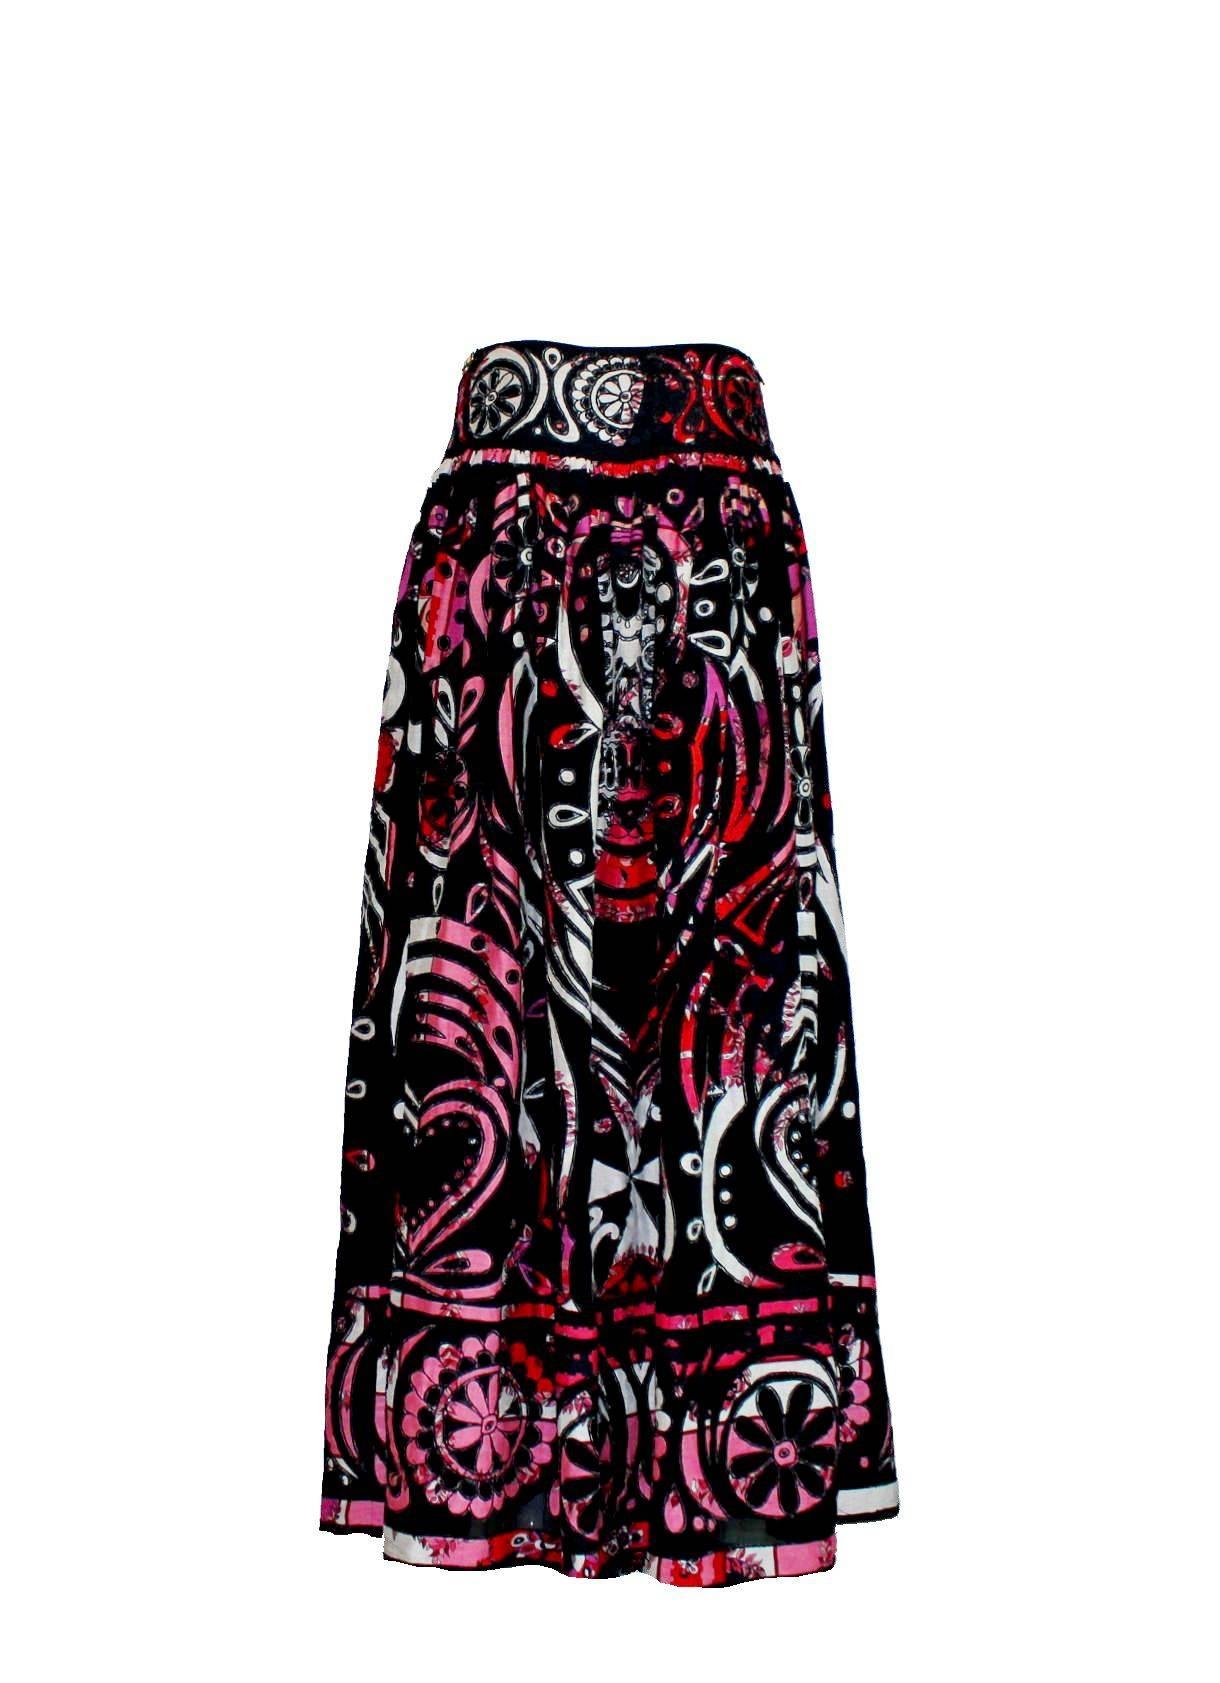 Beautiful maxi skirt by Emilio Pucci
Stunning piece 
Designed by Peter Dundas for Pucci
One of the most iconic pieces he designed for Pucci
Rare collector's piece - only a few pieces were produced
Embroidered all over with hand-cut pieces in